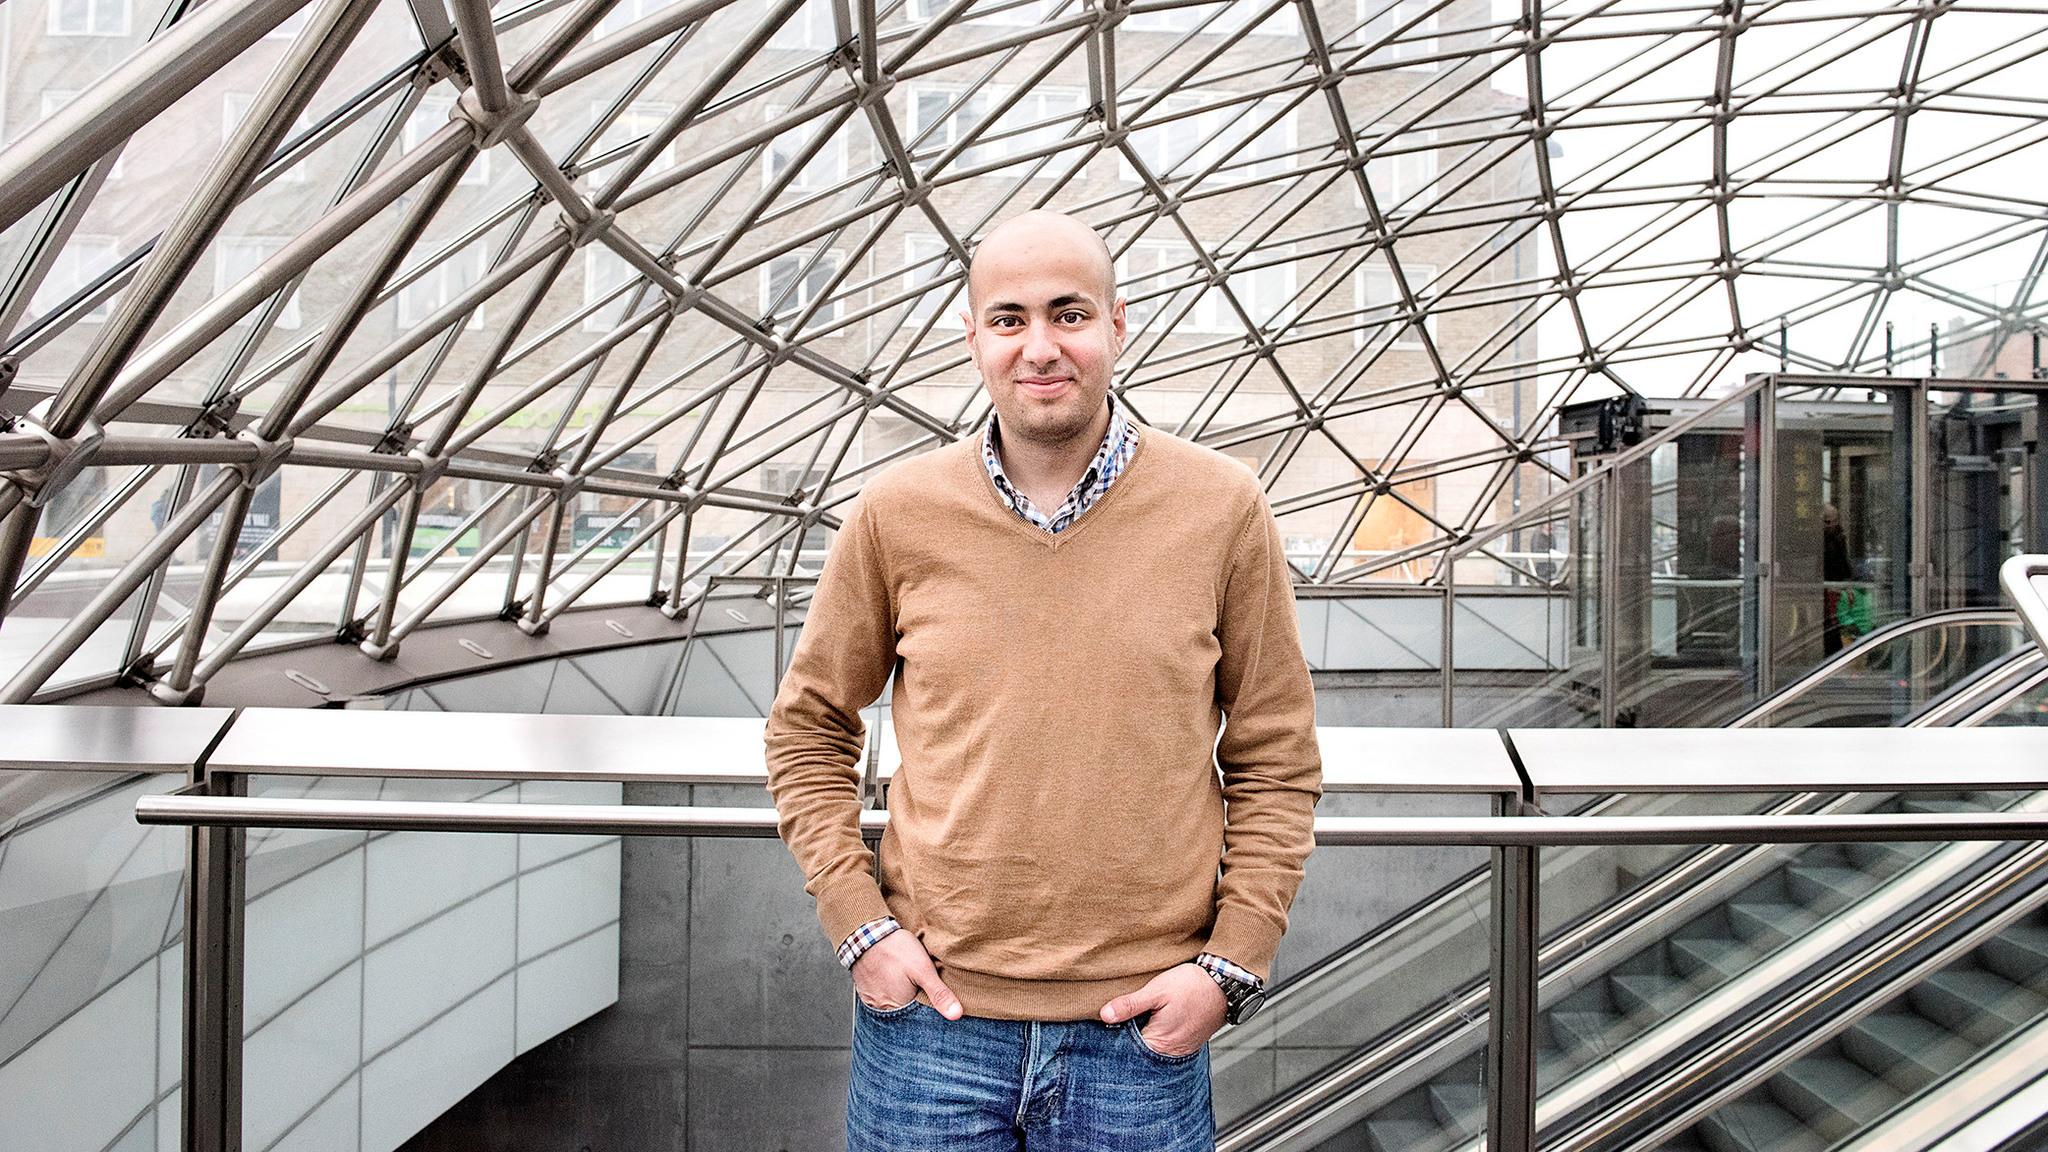 Portait of Mouhanad Sharabati in a dome-like glass building, escalators in the background.